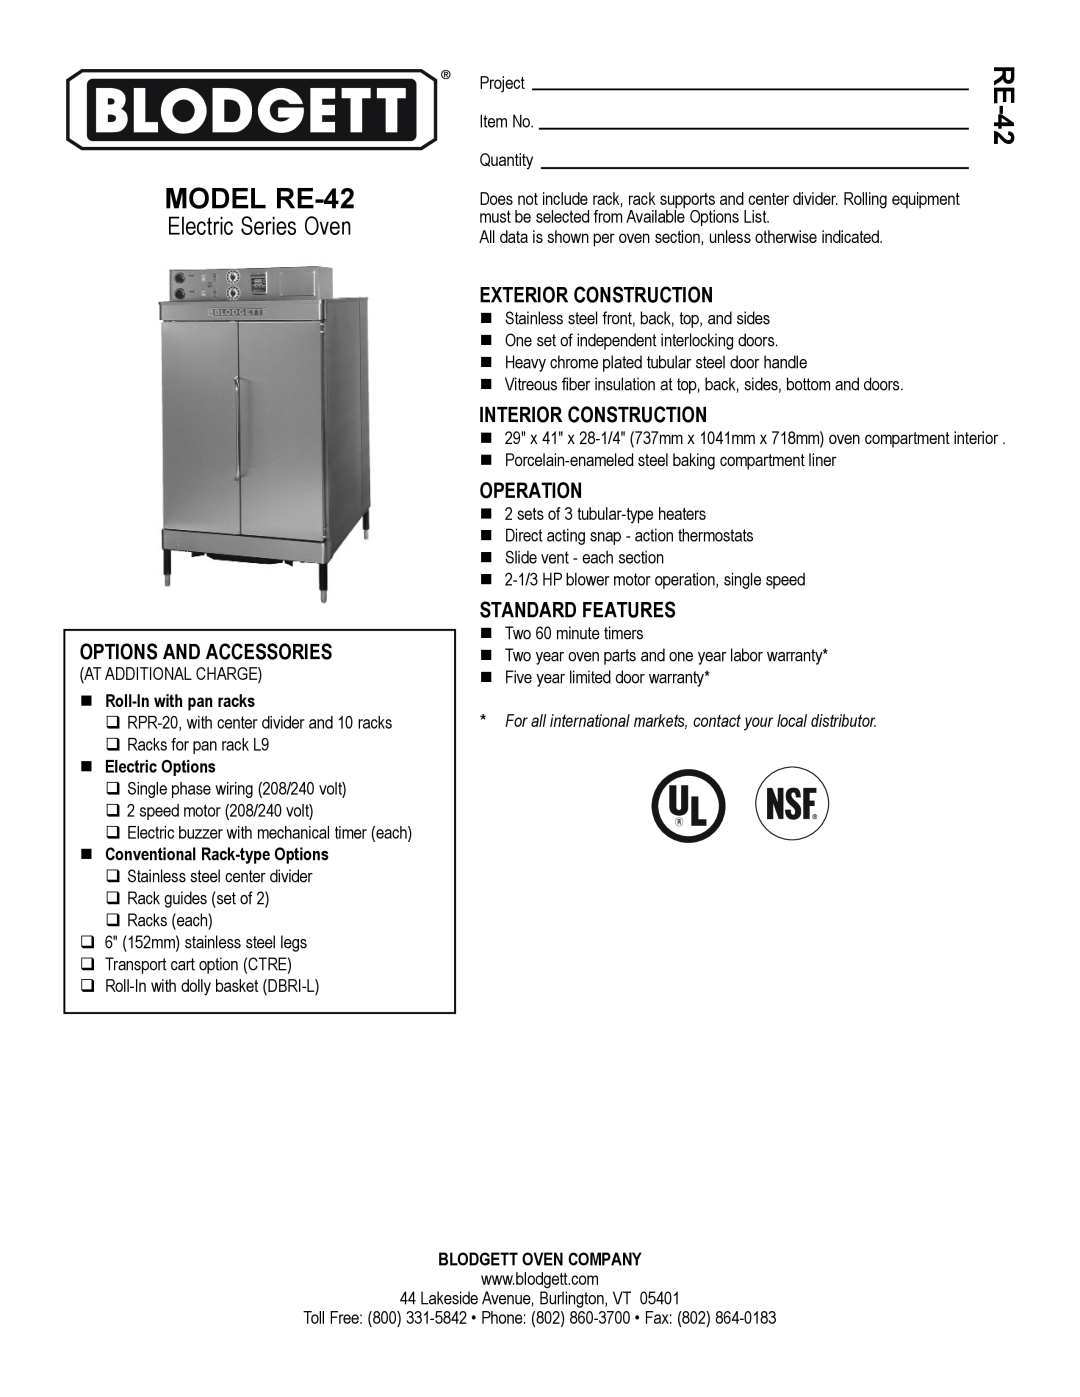 Blodgett warranty MODEL RE-42, Options And Accessories, Exterior Construction, Interior Construction, Operation 